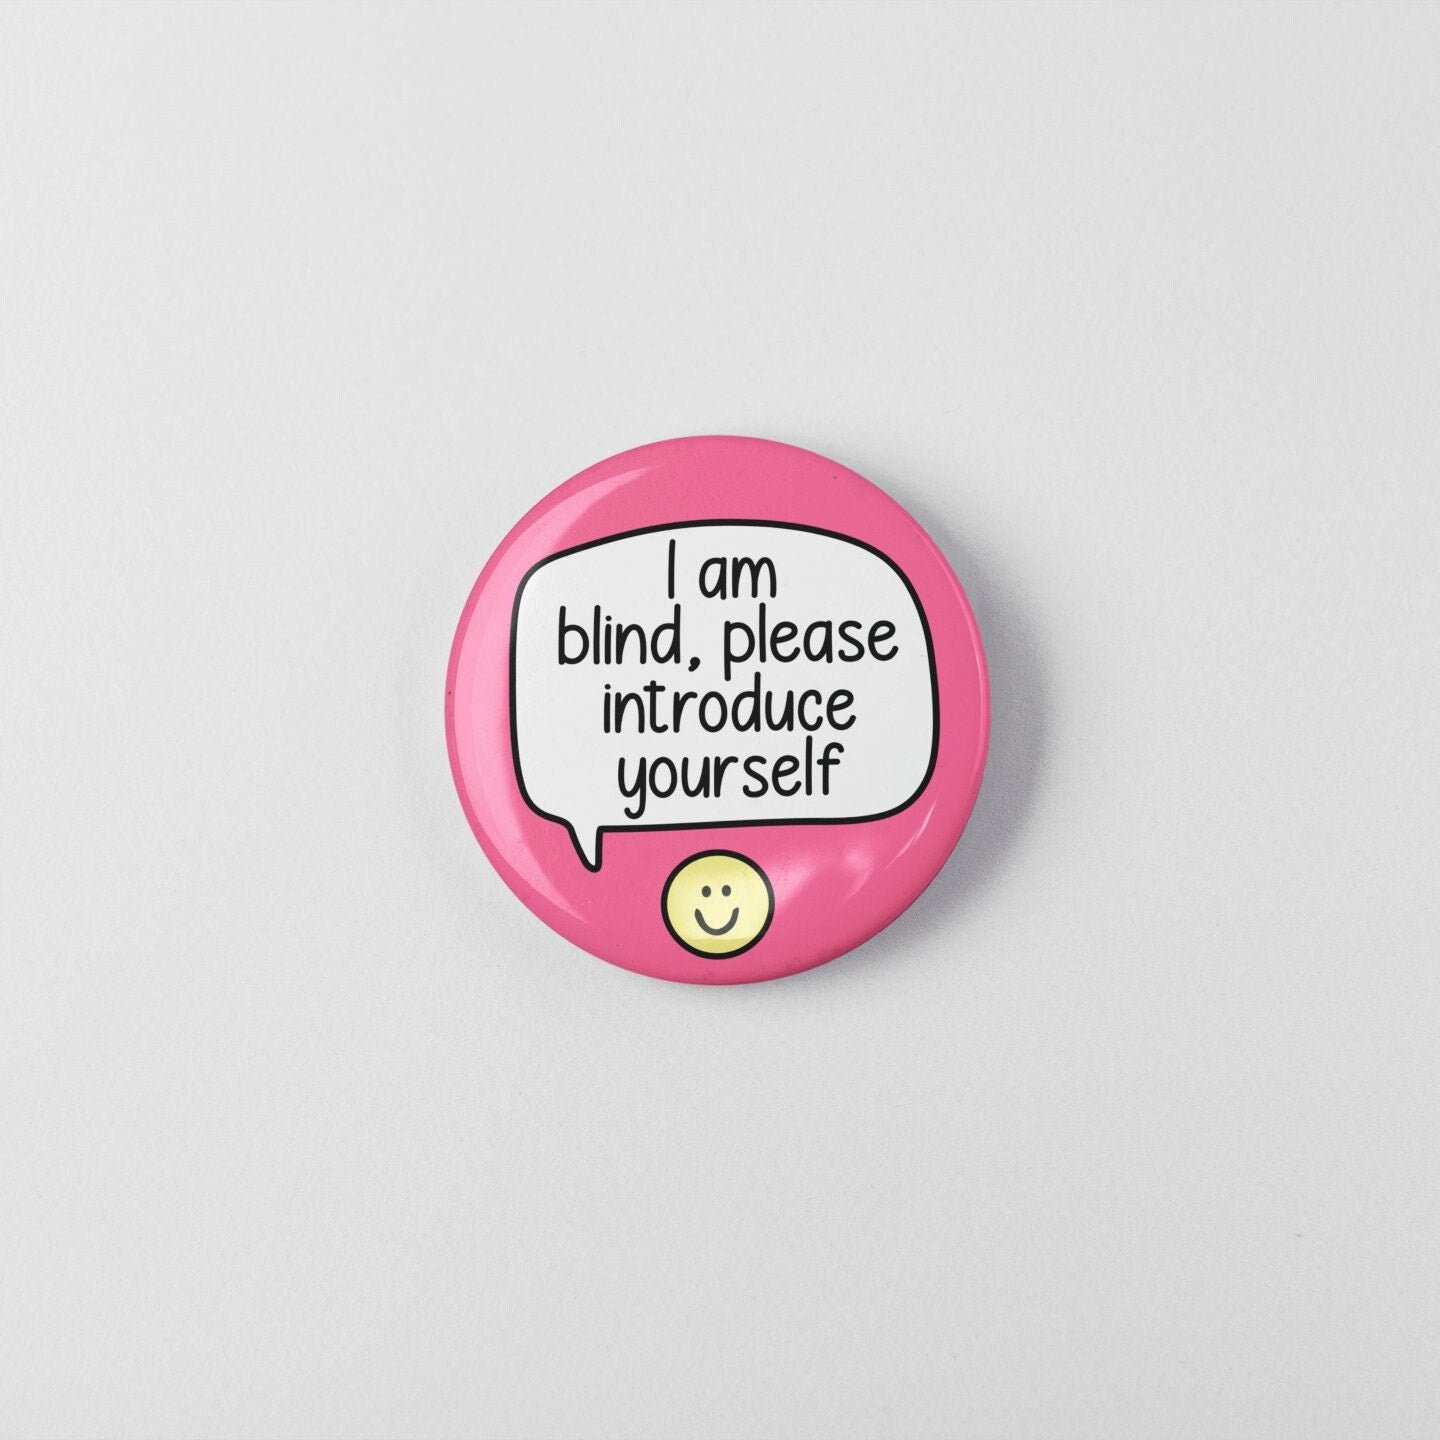 I Am Blind, Please Introduce Yourself - Badge Pin | Blindness Pins, Blind Awareness